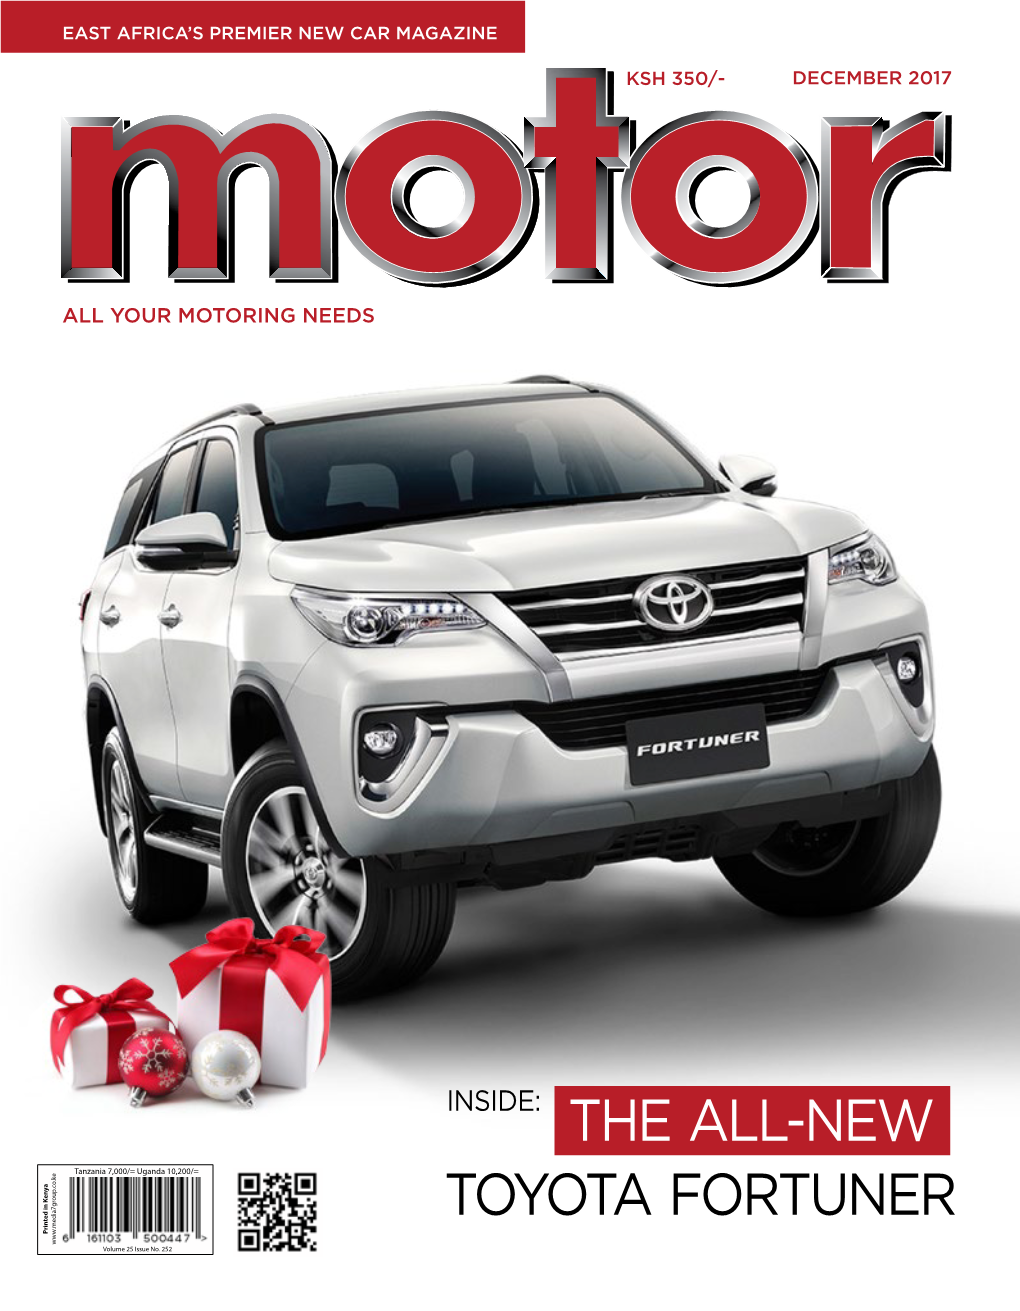 The All-New Toyota Fortuner